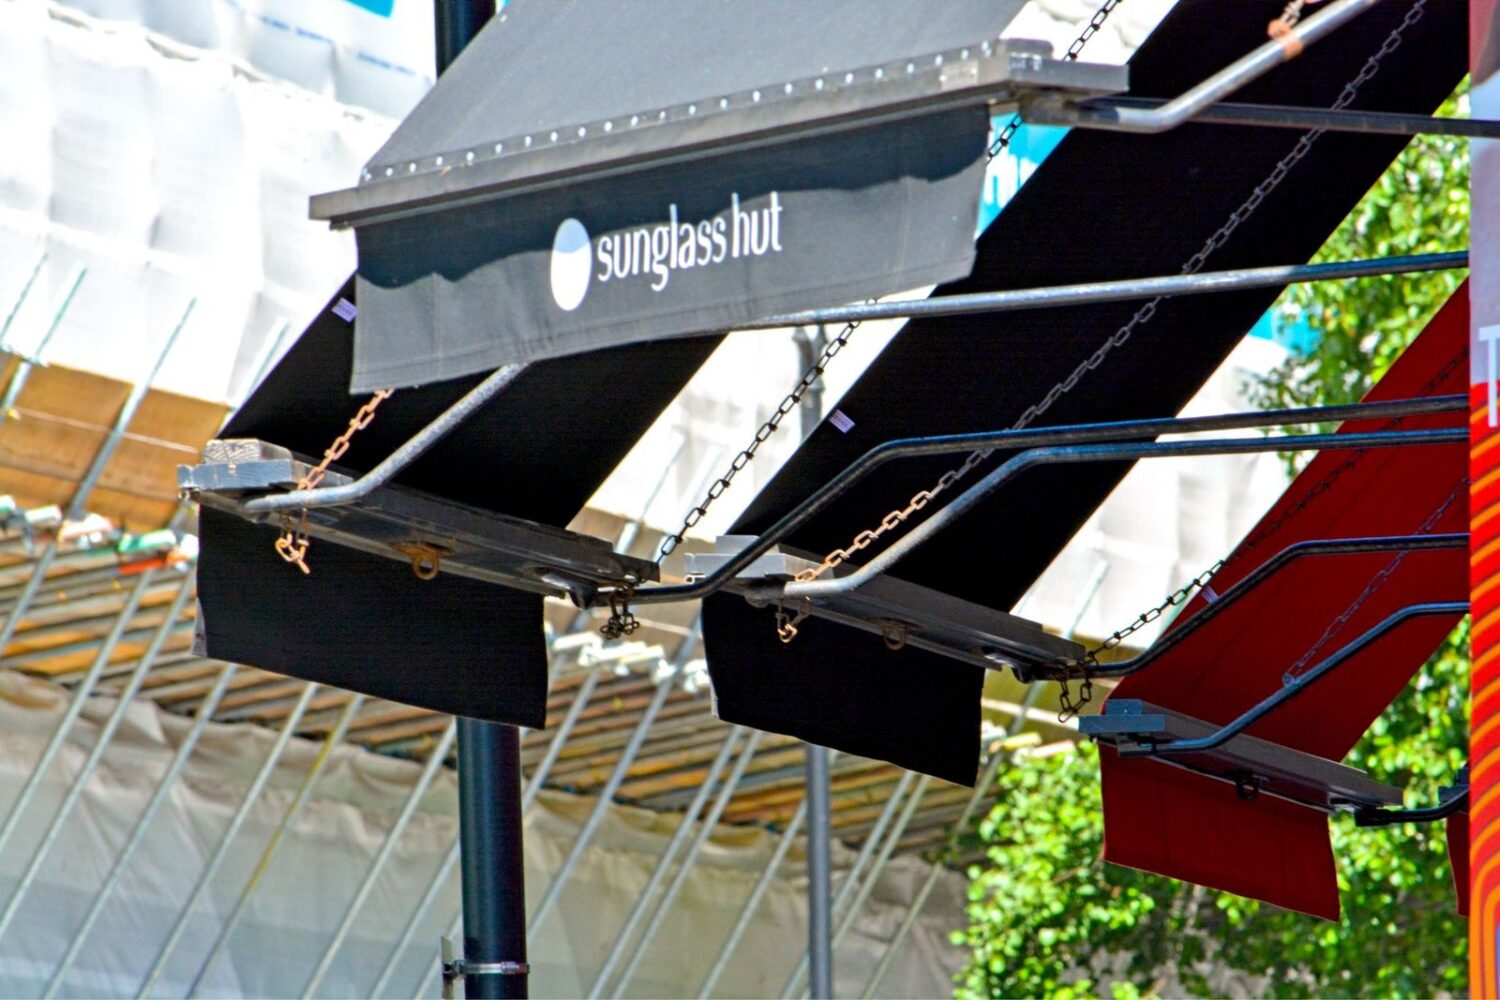 Branded awnings